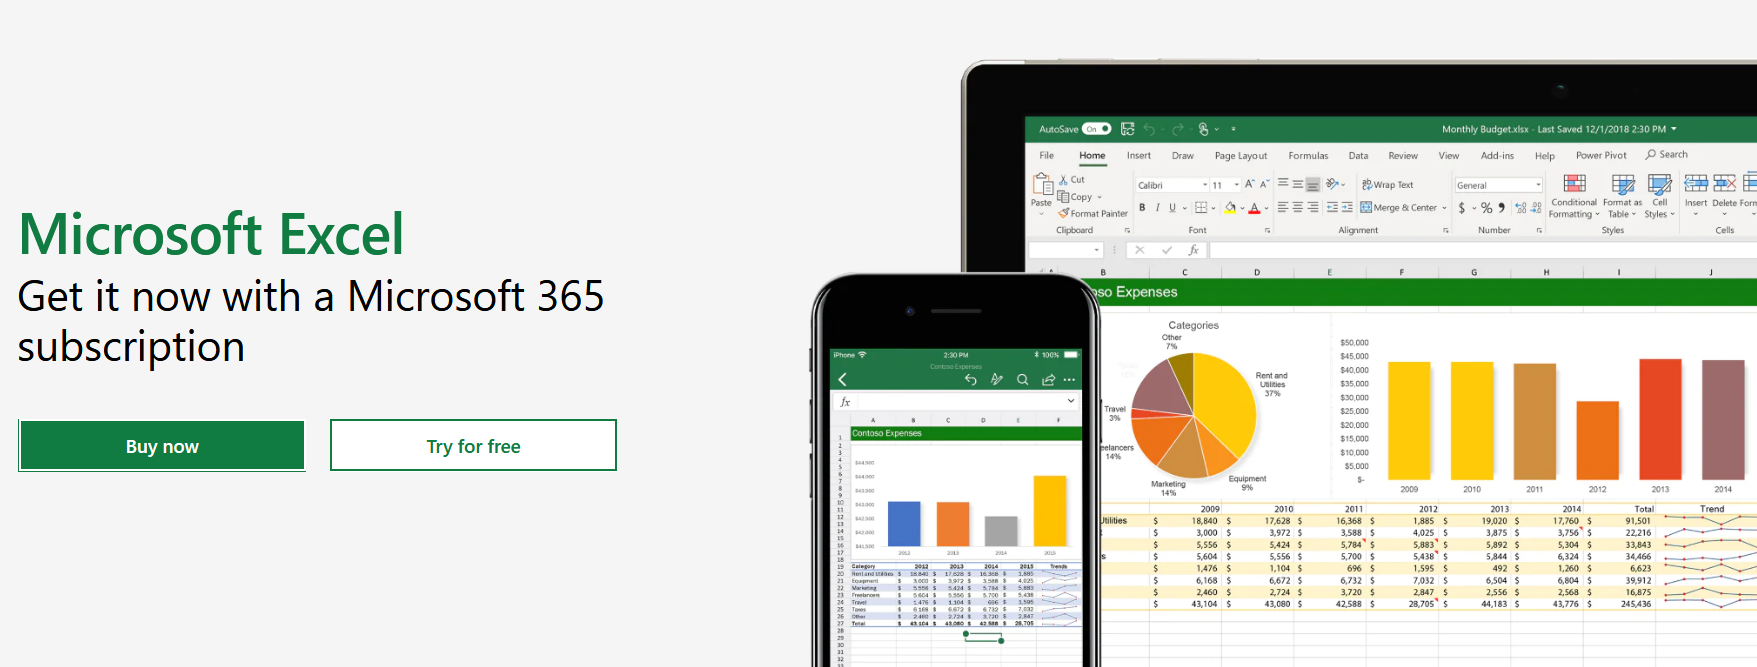 Find detailed information about Microsoft Excel